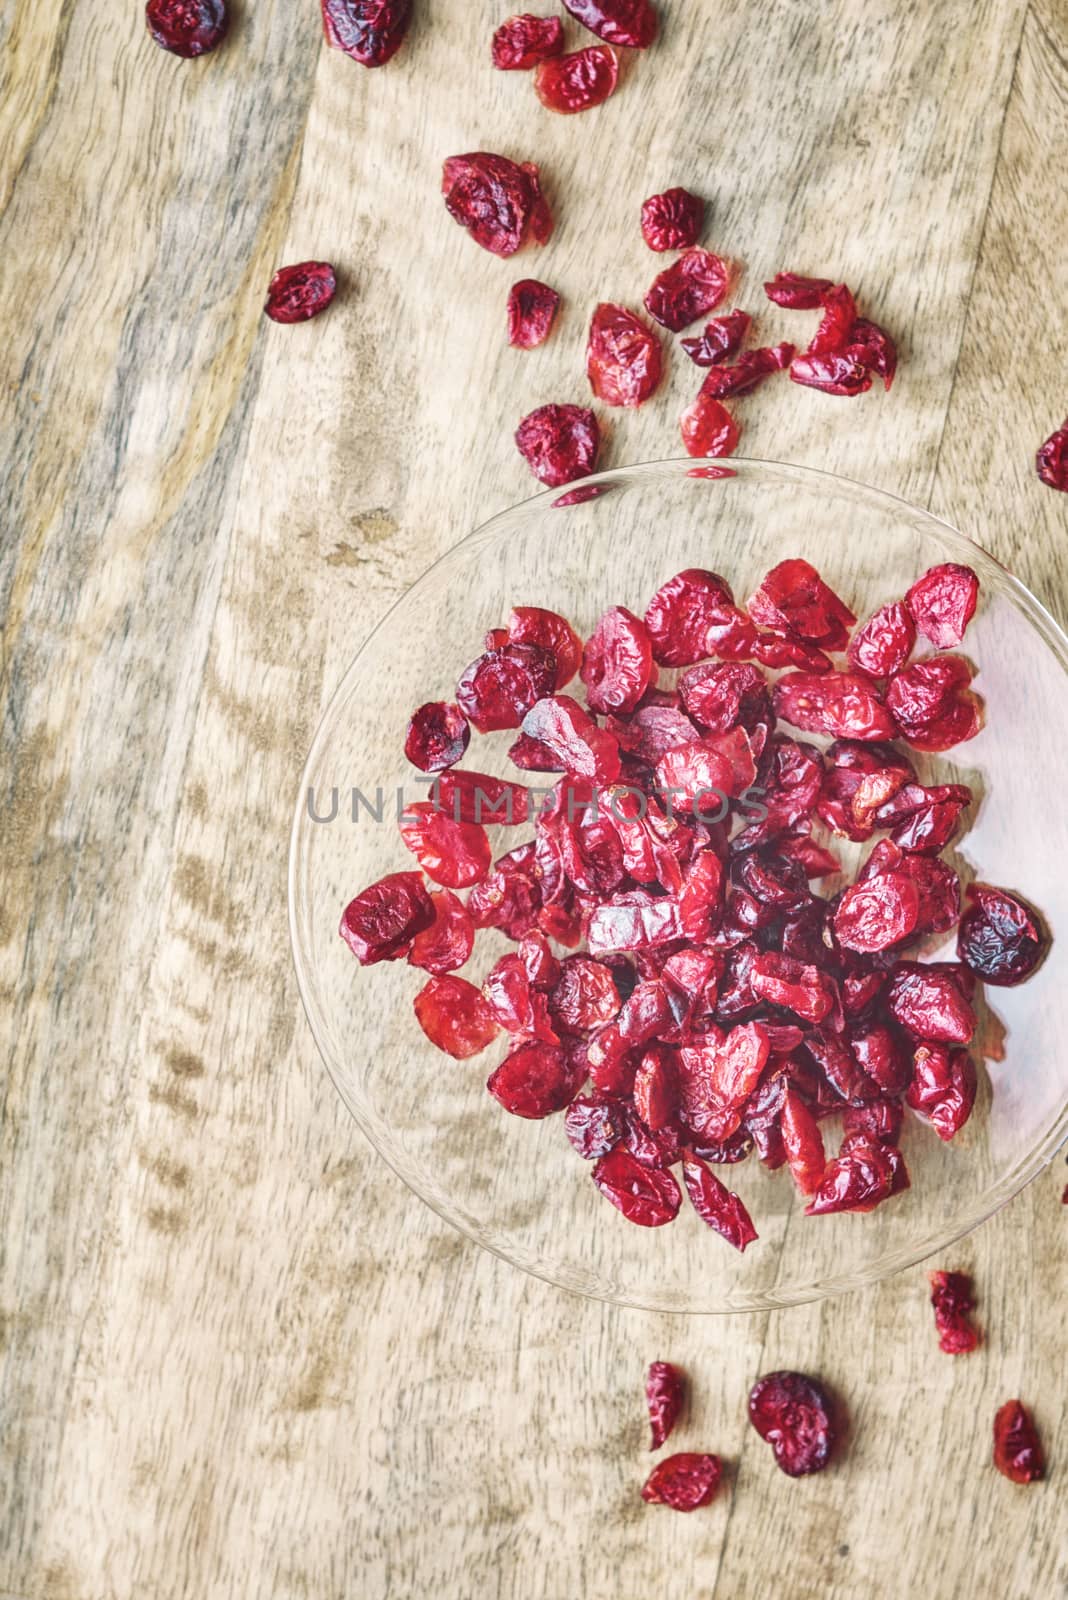 Dried cranberries in the glass bowl on the wooden table by Deniskarpenkov